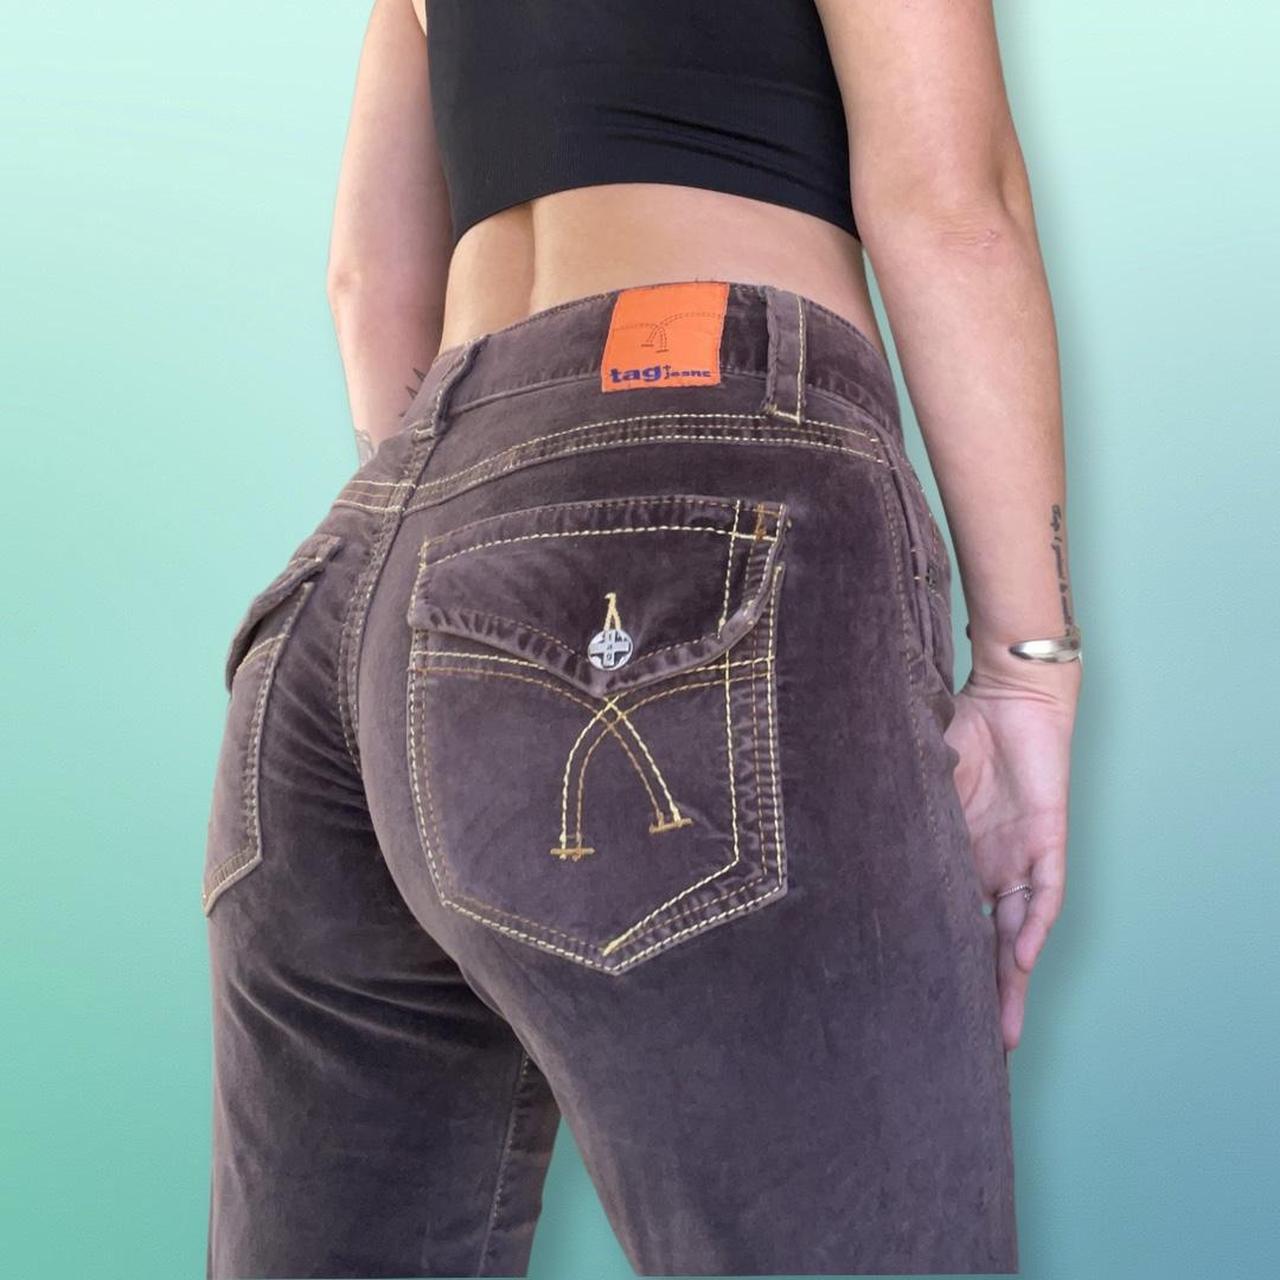 TAG Heuer Women's Brown and Orange Jeans